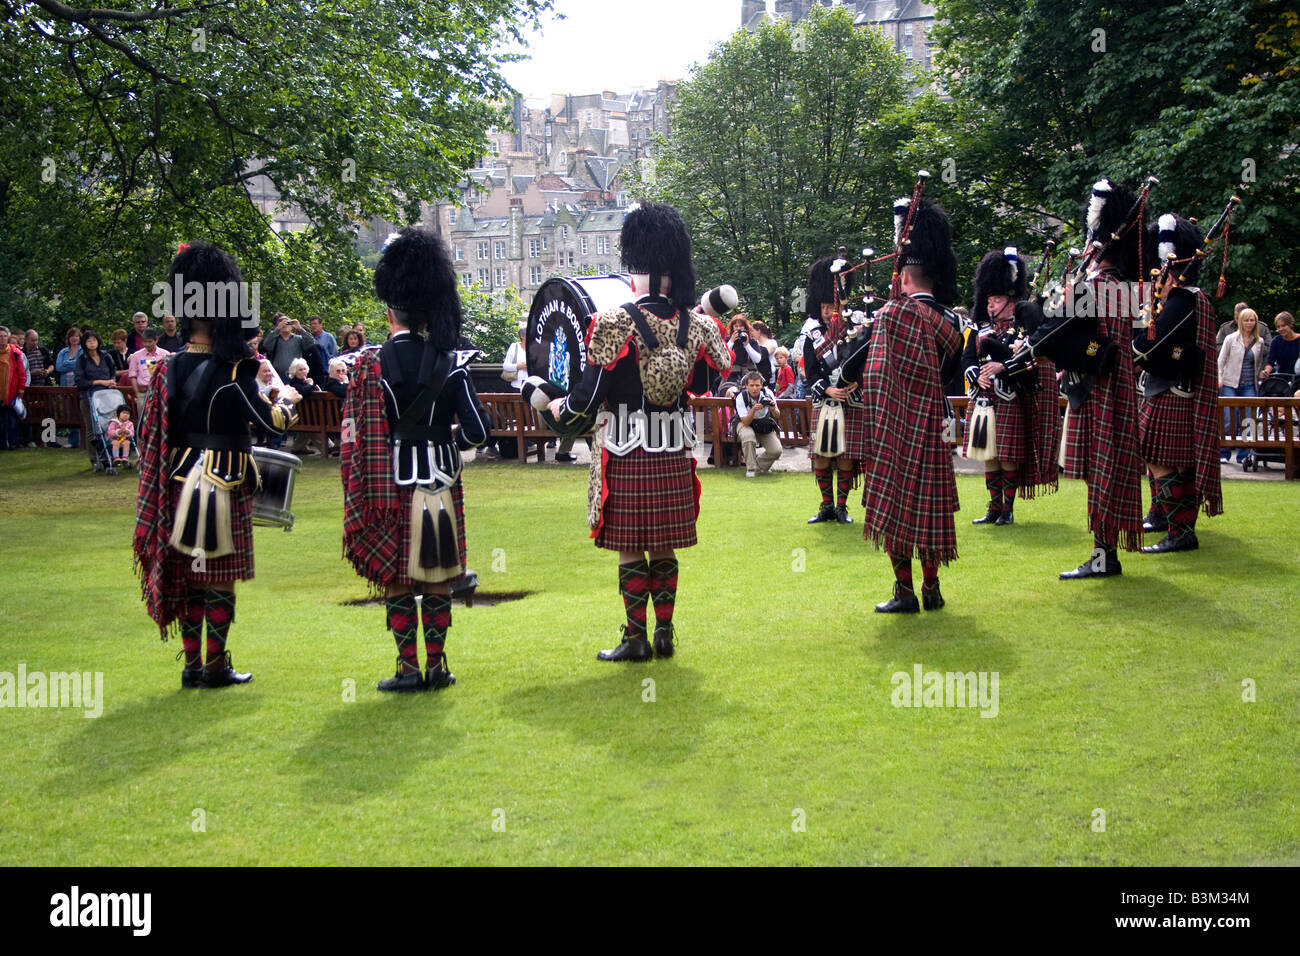 The Lothian and Borders Police Pipe Band traditional performance in Princes Street gardens during the Edinburgh Fringe Festival. Stock Photo